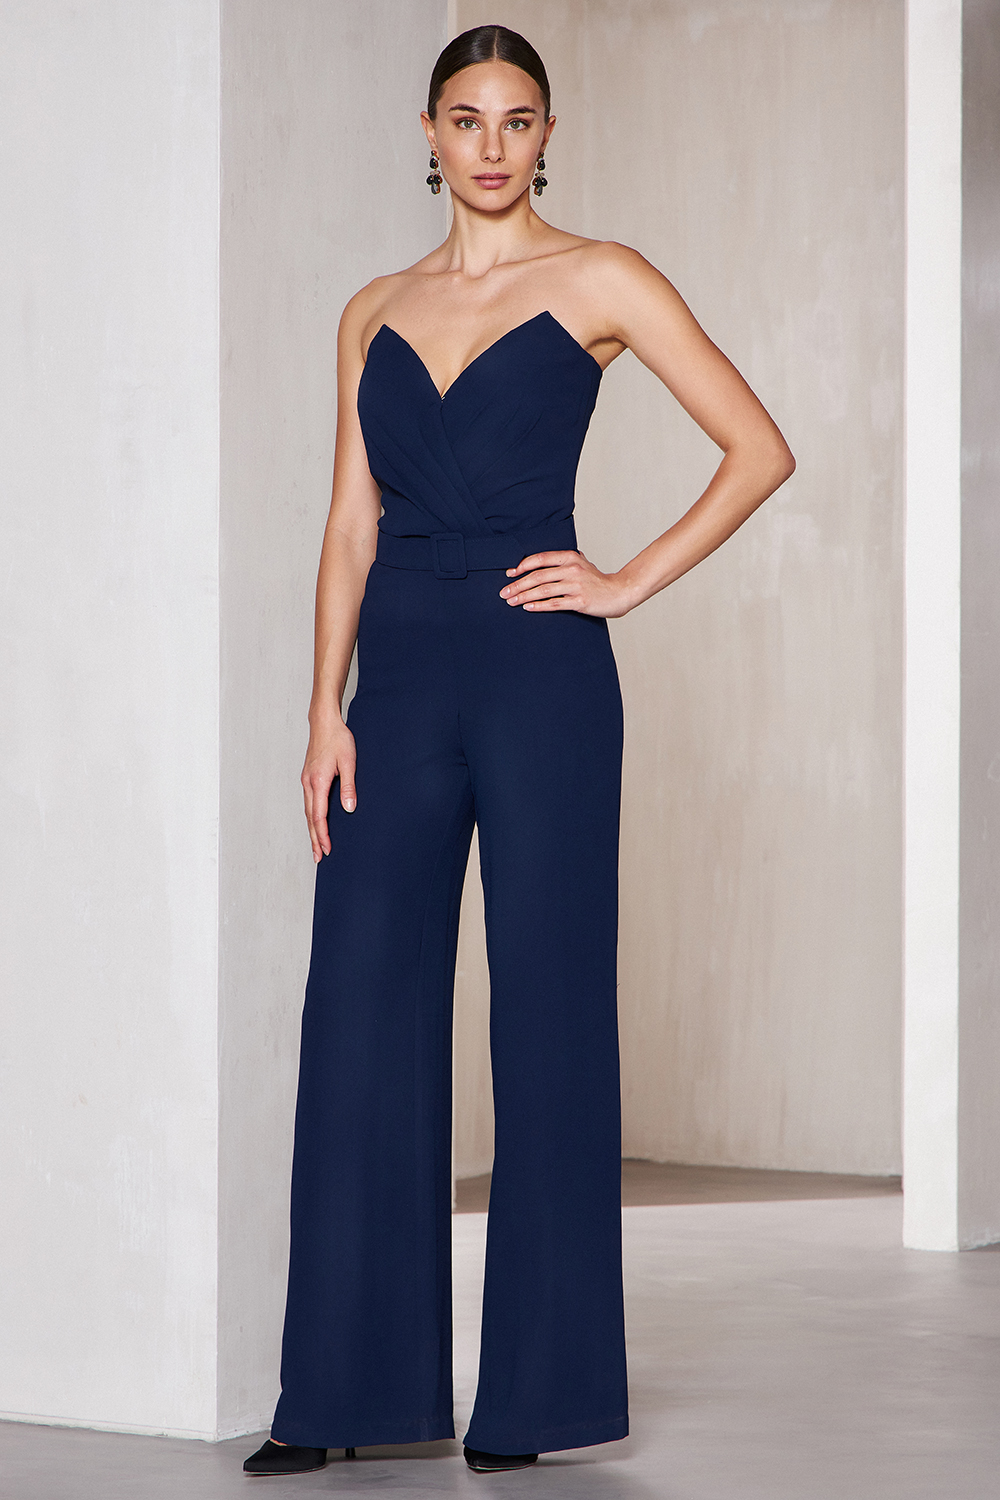 Cocktail Dresses / Cocktail jumpsuit strapless with crepe fabric and belt